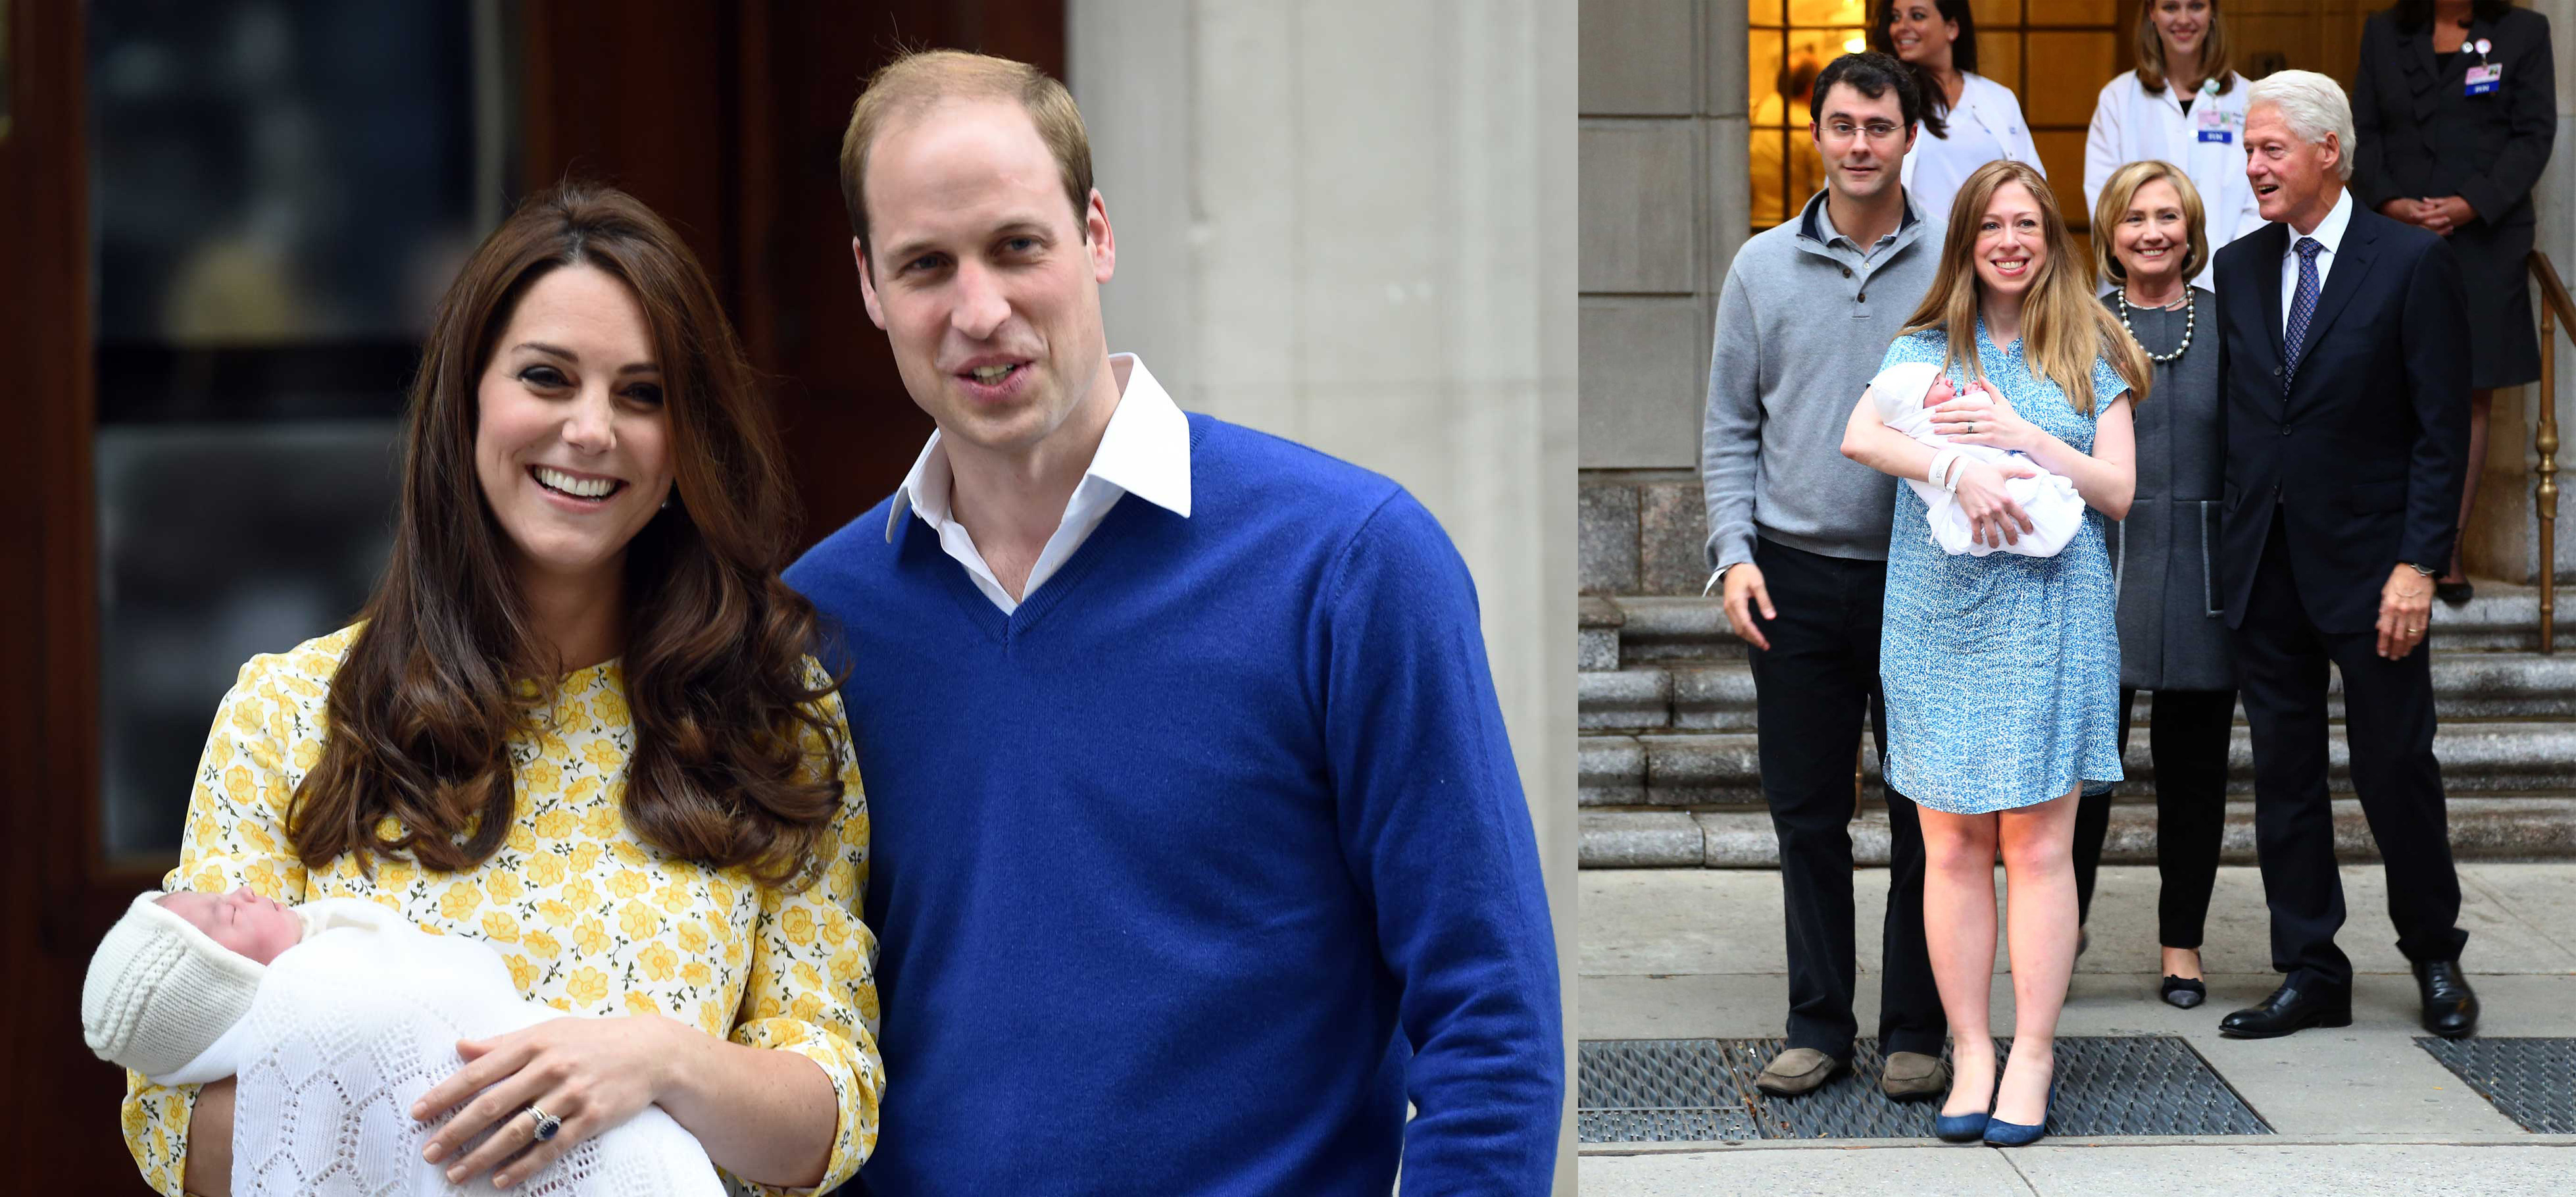 (L) Catherine Duchess of Cambridge and Prince William, Duke of Cambridge leave the Lindo Wing at St. Mary's Hospital  with their new born baby daughter. (R) Chelsea Clinton leaves Lenox Hill Hospital with her baby, Charlotte, husband Marc and parents, Bill and Hillary Clinton. ((L) Anwar Hussein—Getty Images; (R) A. Ariani—Corbis)